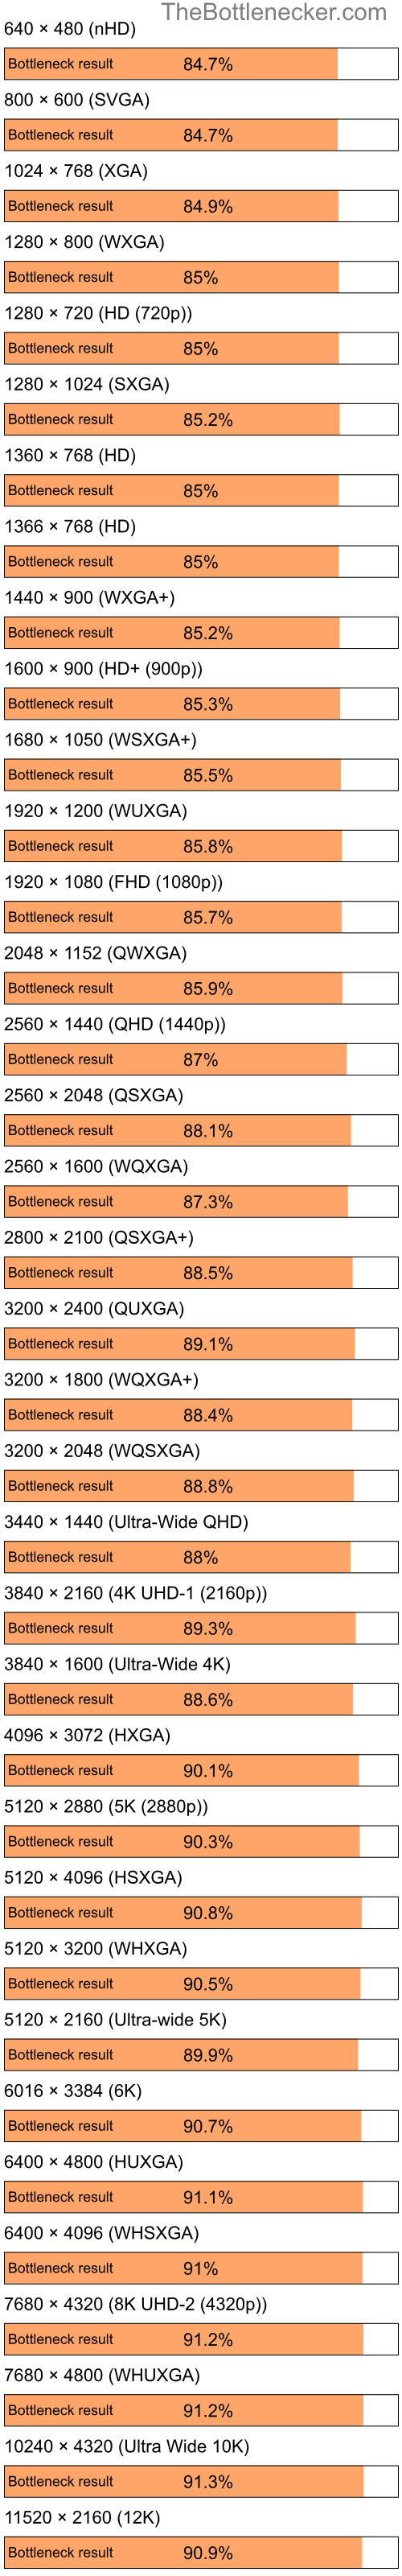 Bottleneck results by resolution for Intel Celeron and NVIDIA GeForce 7150M in Graphic Card Intense Tasks